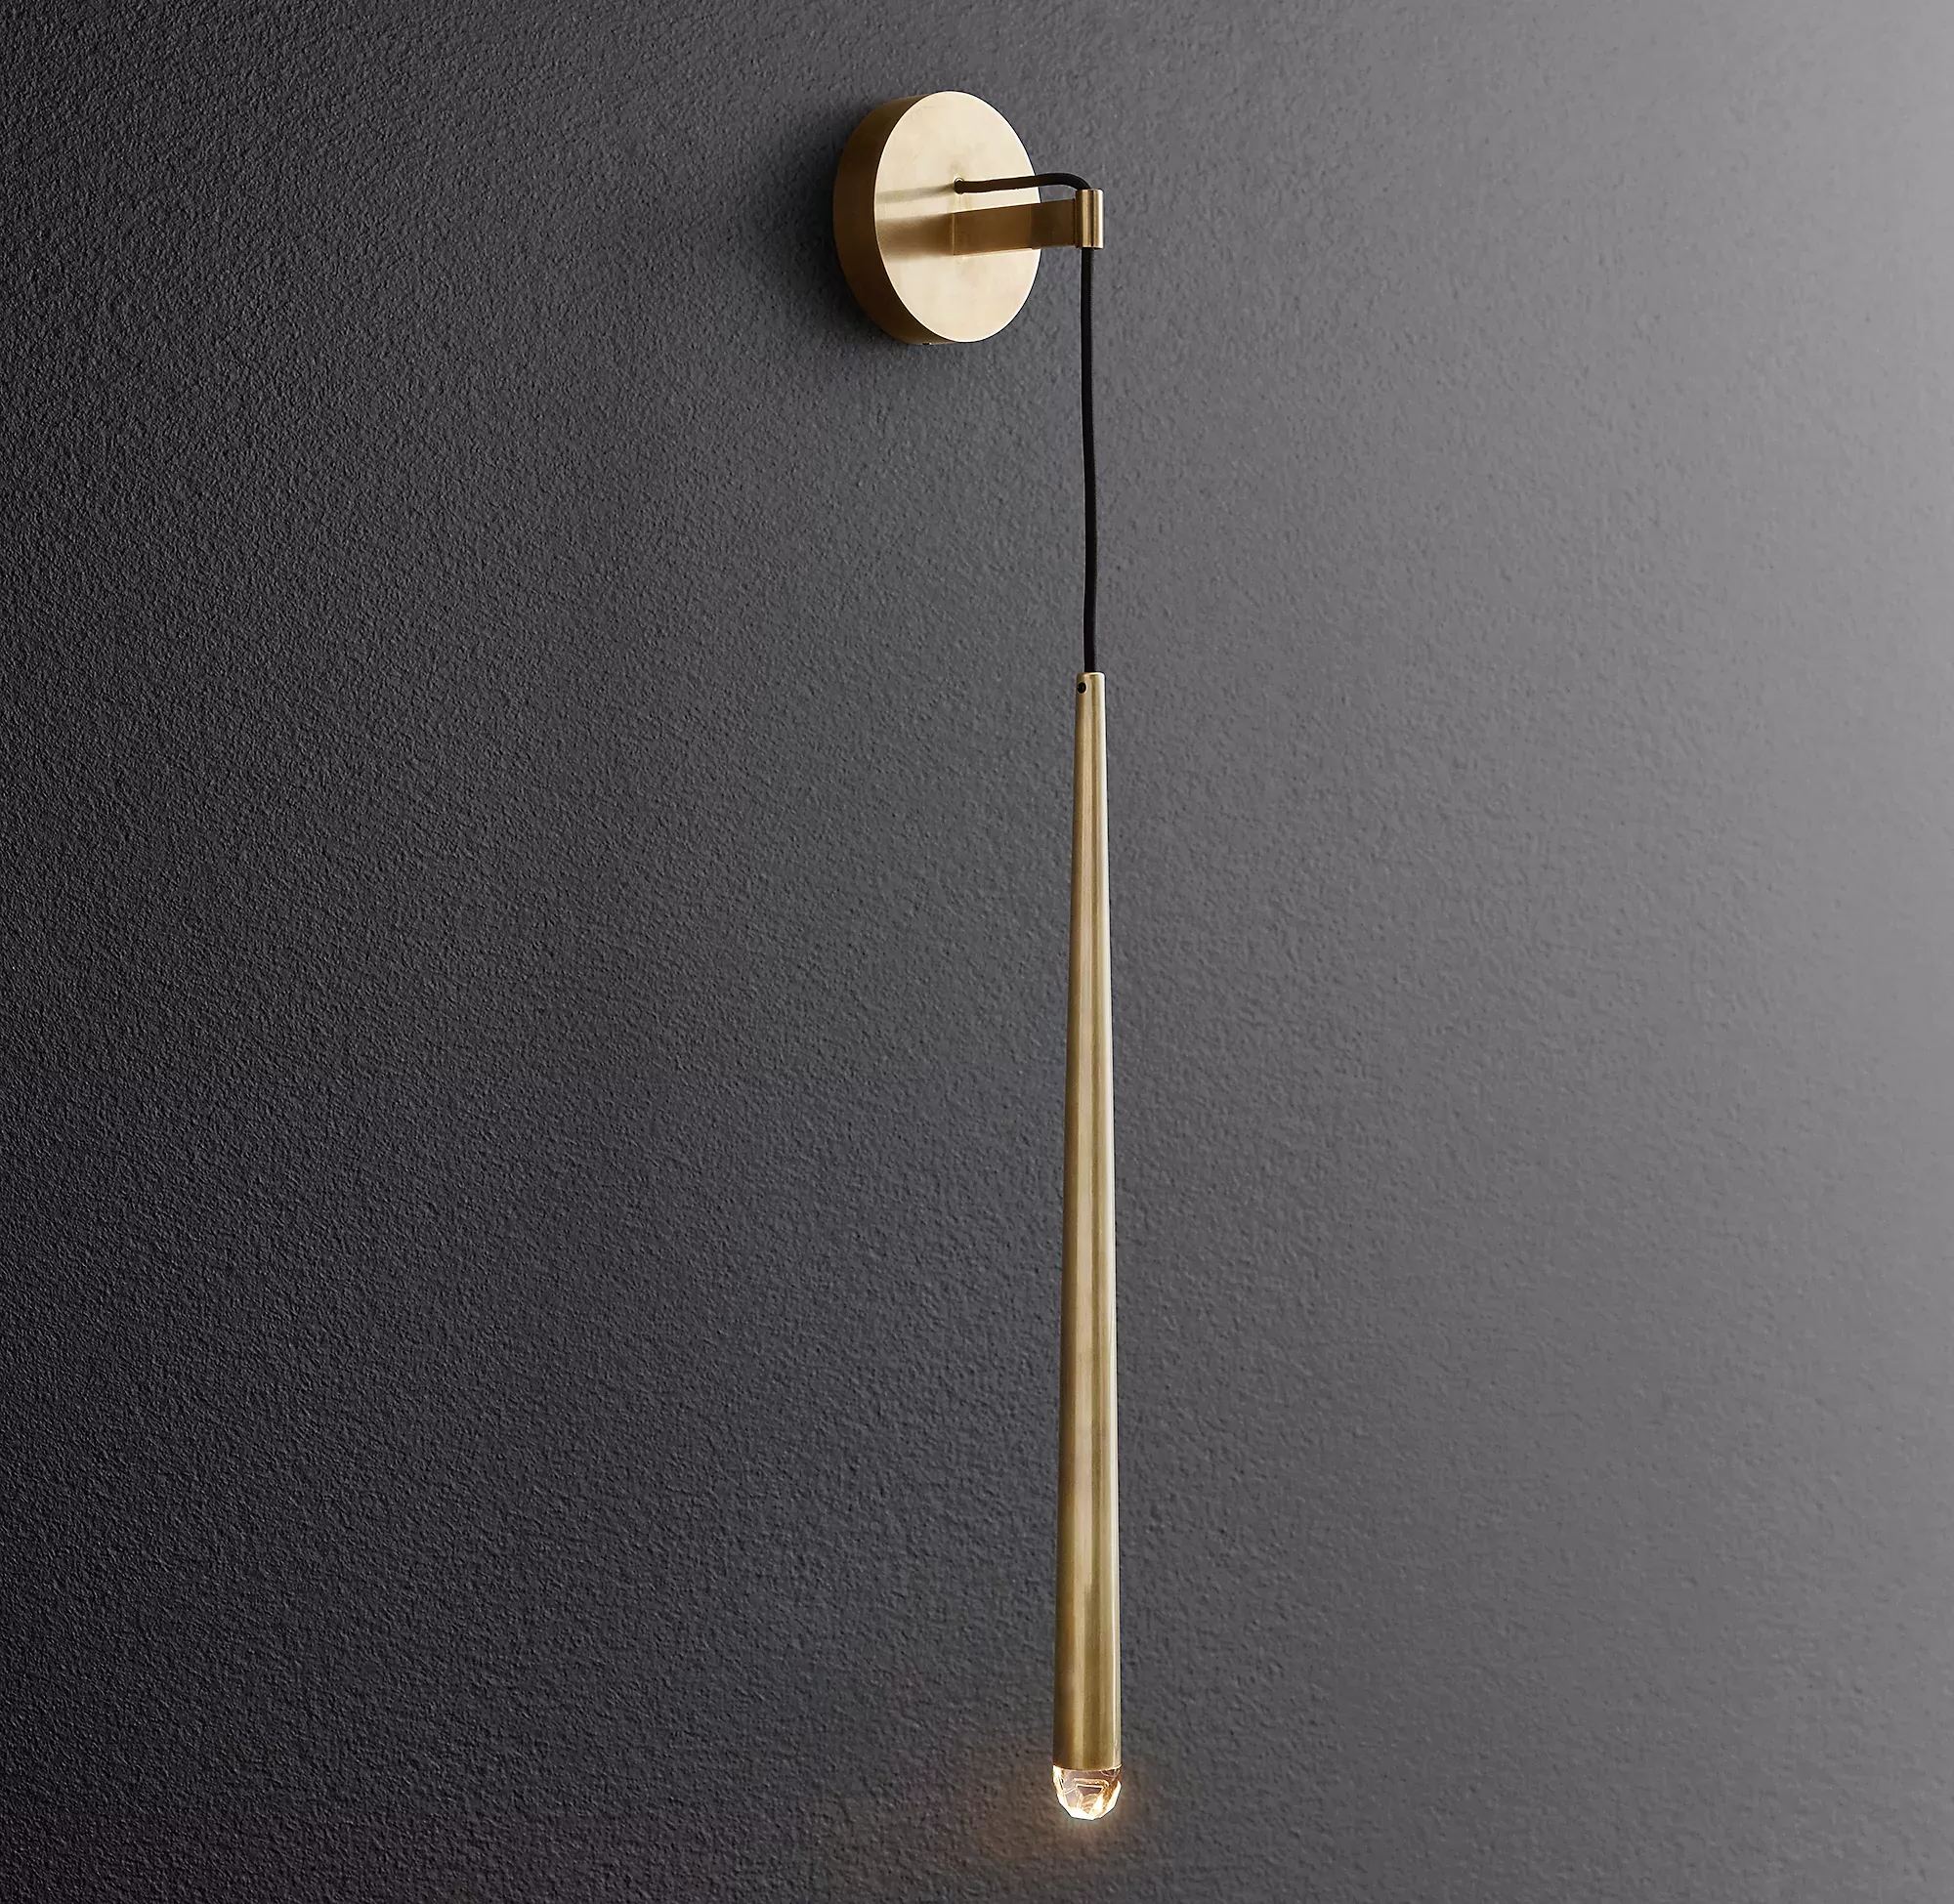 Aquitaine Grand Wall Sconce-alimialighting